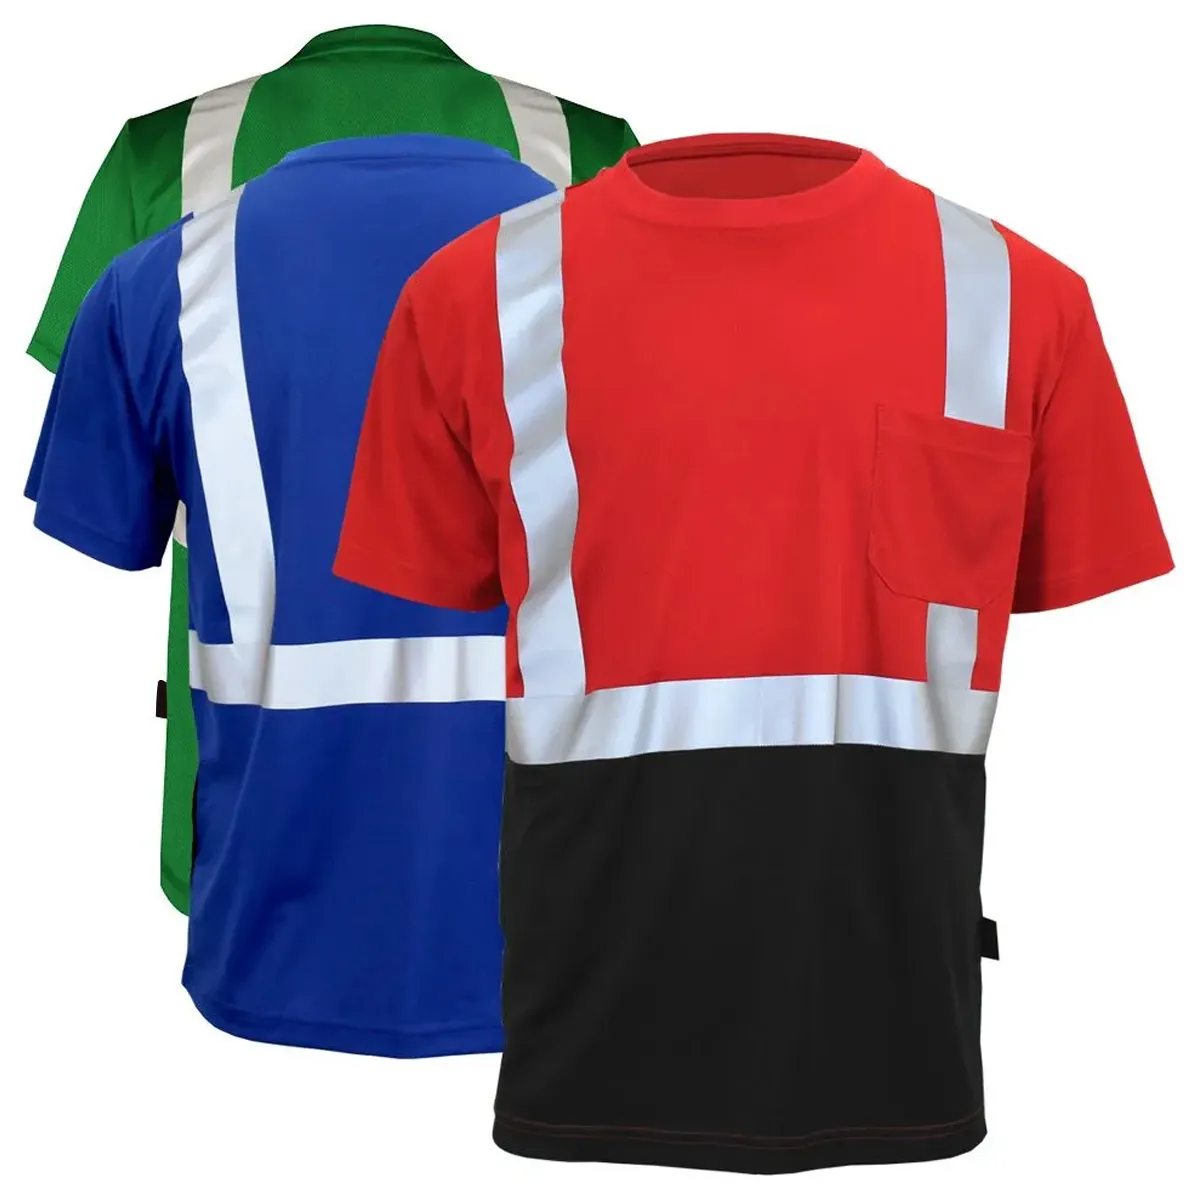 Fashionable Available Many Colors Good Quality Safety Wear T Shirts For Unisex High Quality T Shirts By NEEDS OUTDOOR